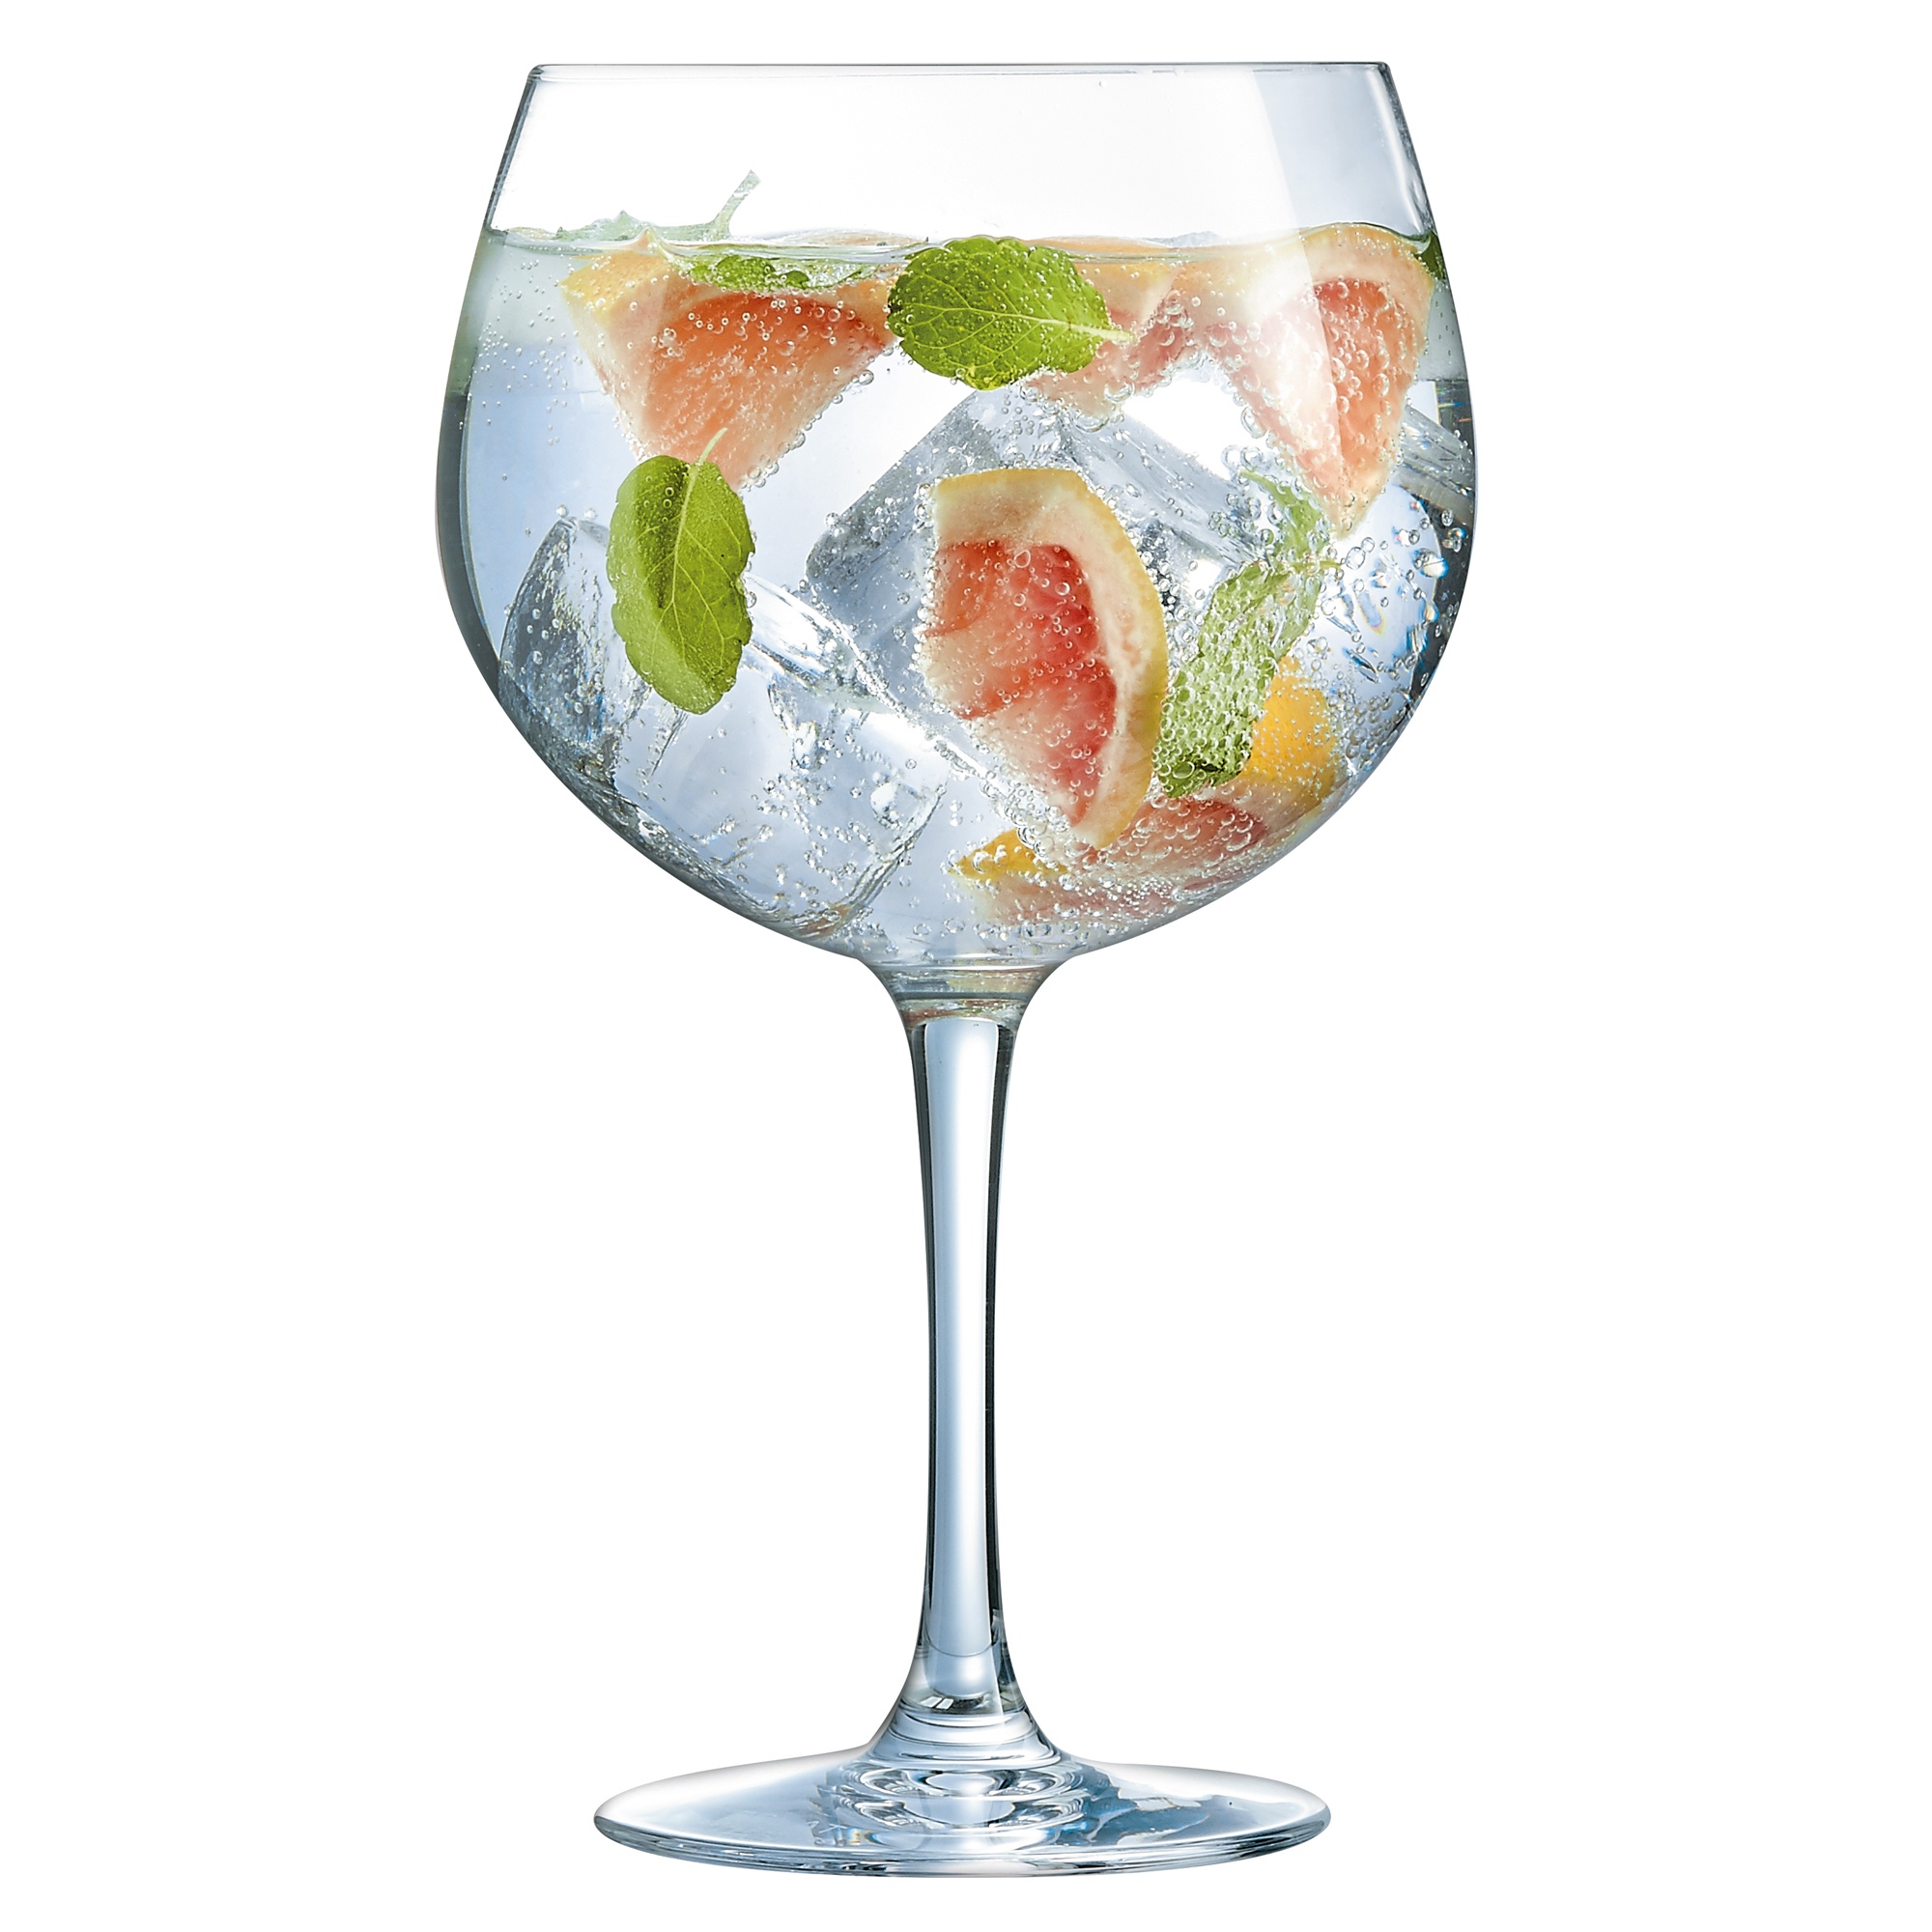 Download Eclat Cristal D Arques 700ml Balloon Crystal Gin Tonic Cocktail Drinking Glasses Ebay